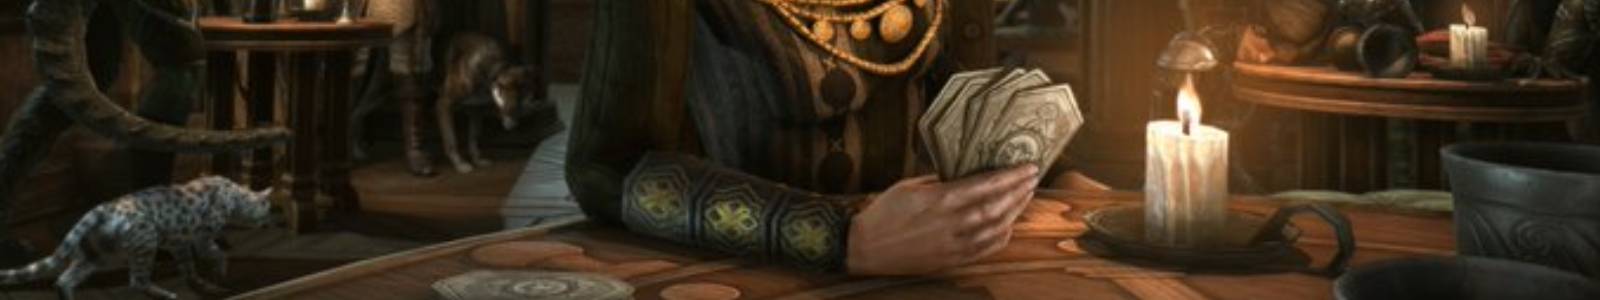 Mercymother Elite Clue Tales of Tribute Clue - ESO header